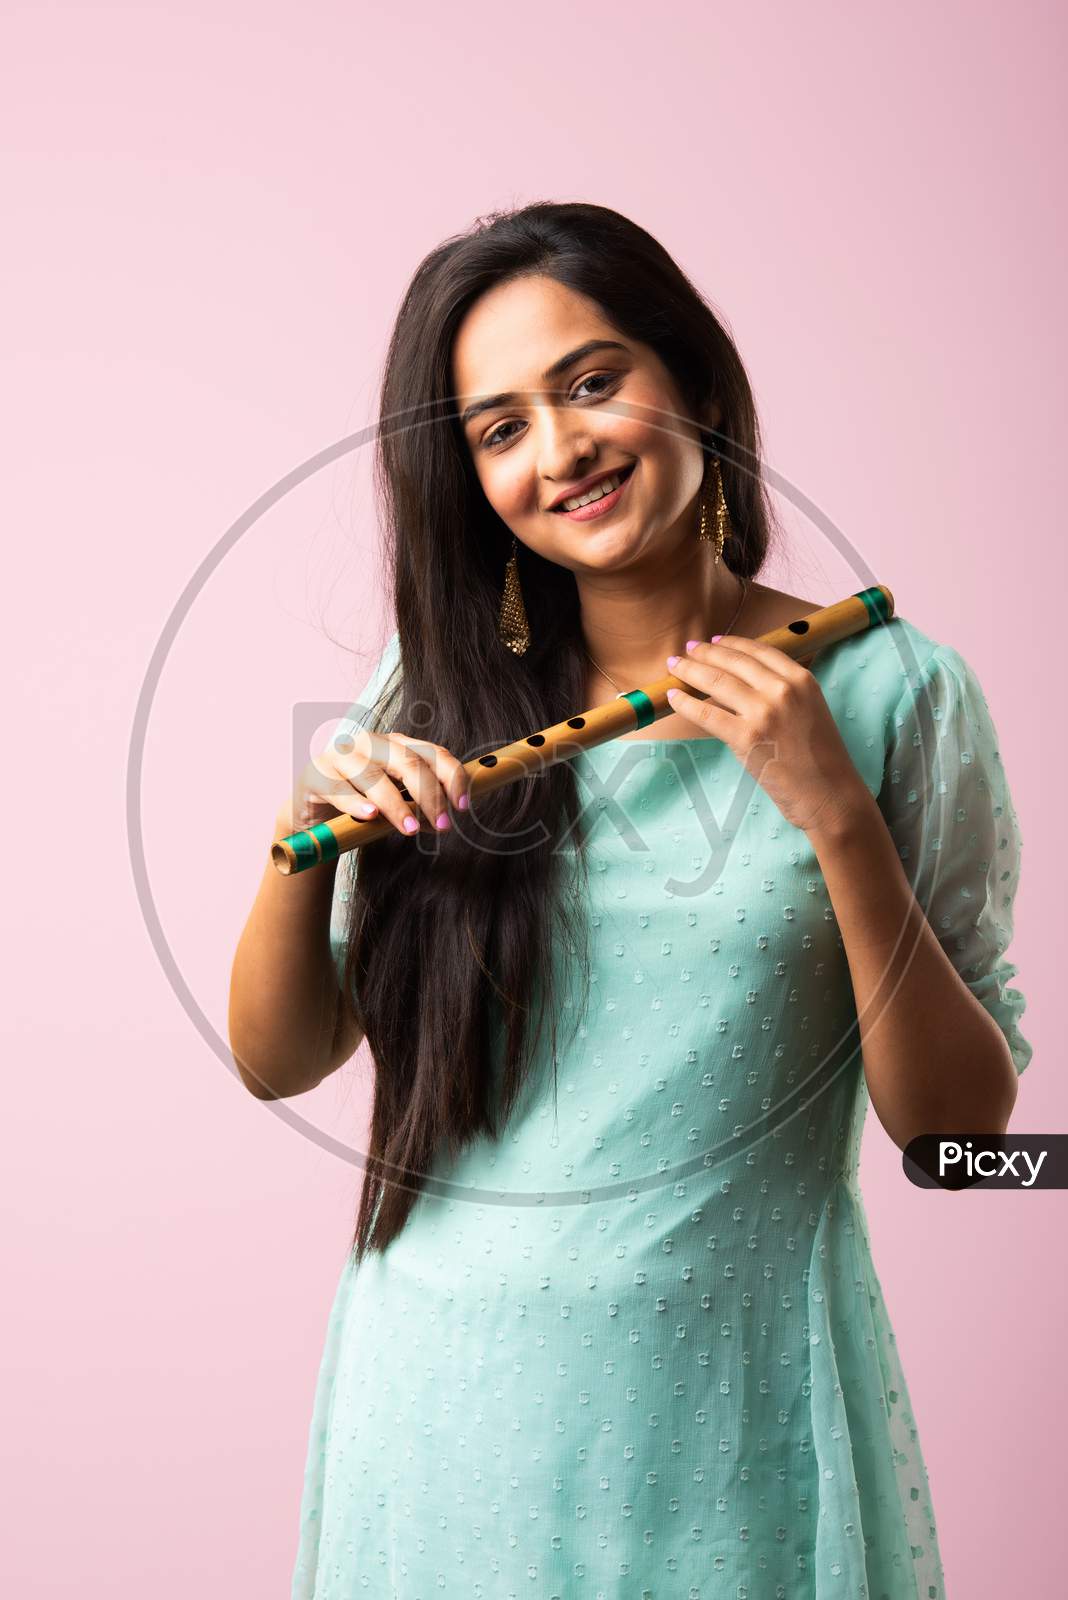 Indian Asian Pretty Young Woman Or Girl Plays Flute Against Pink Background